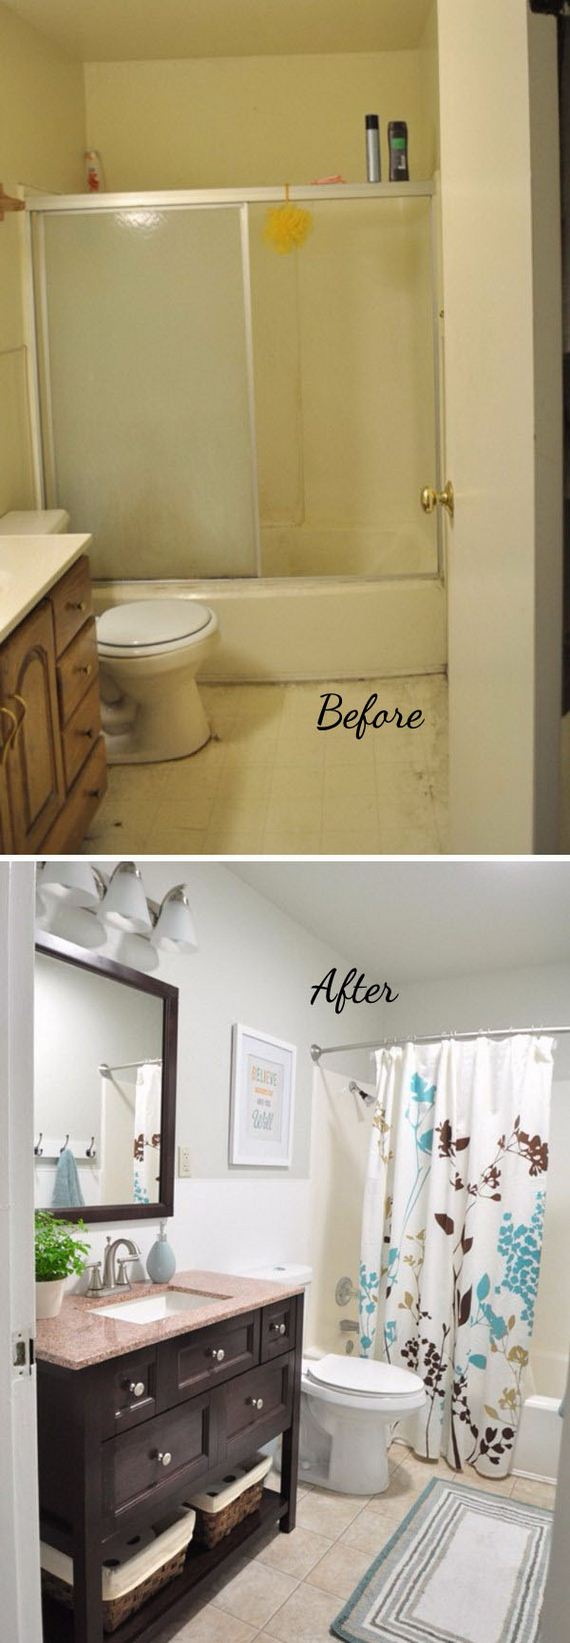 09-awesome-bathroom-makeovers